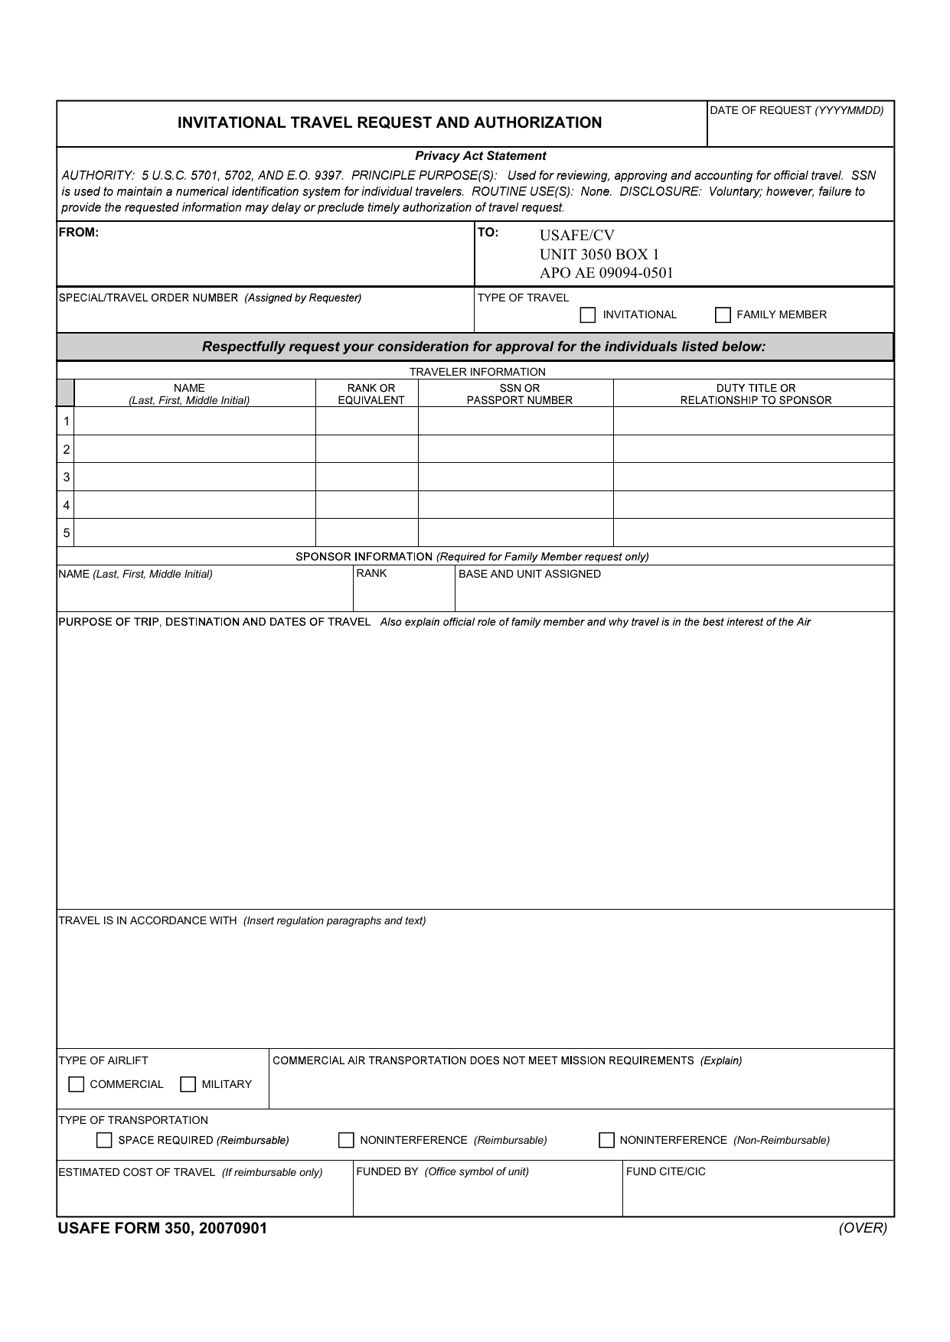 USAFE Form 350 Invitational Travel Request and Authorization, Page 1